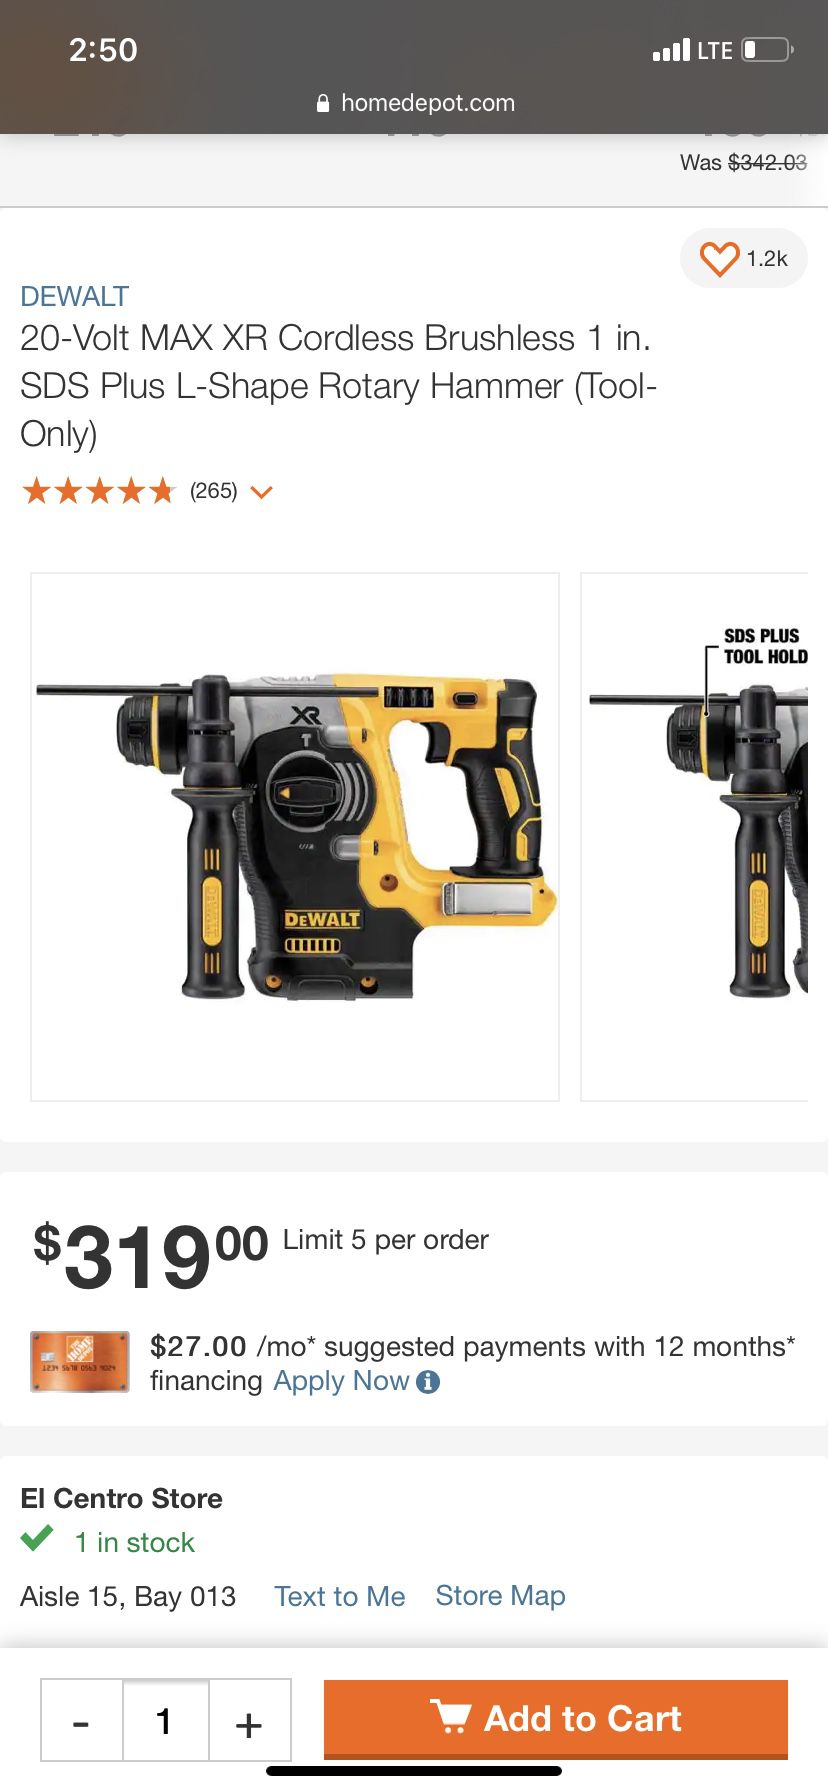 Brand New Dewalt Max Xr Cordless Brushless 1 In Ads Plus L Shape Rotary Hammer Only $150